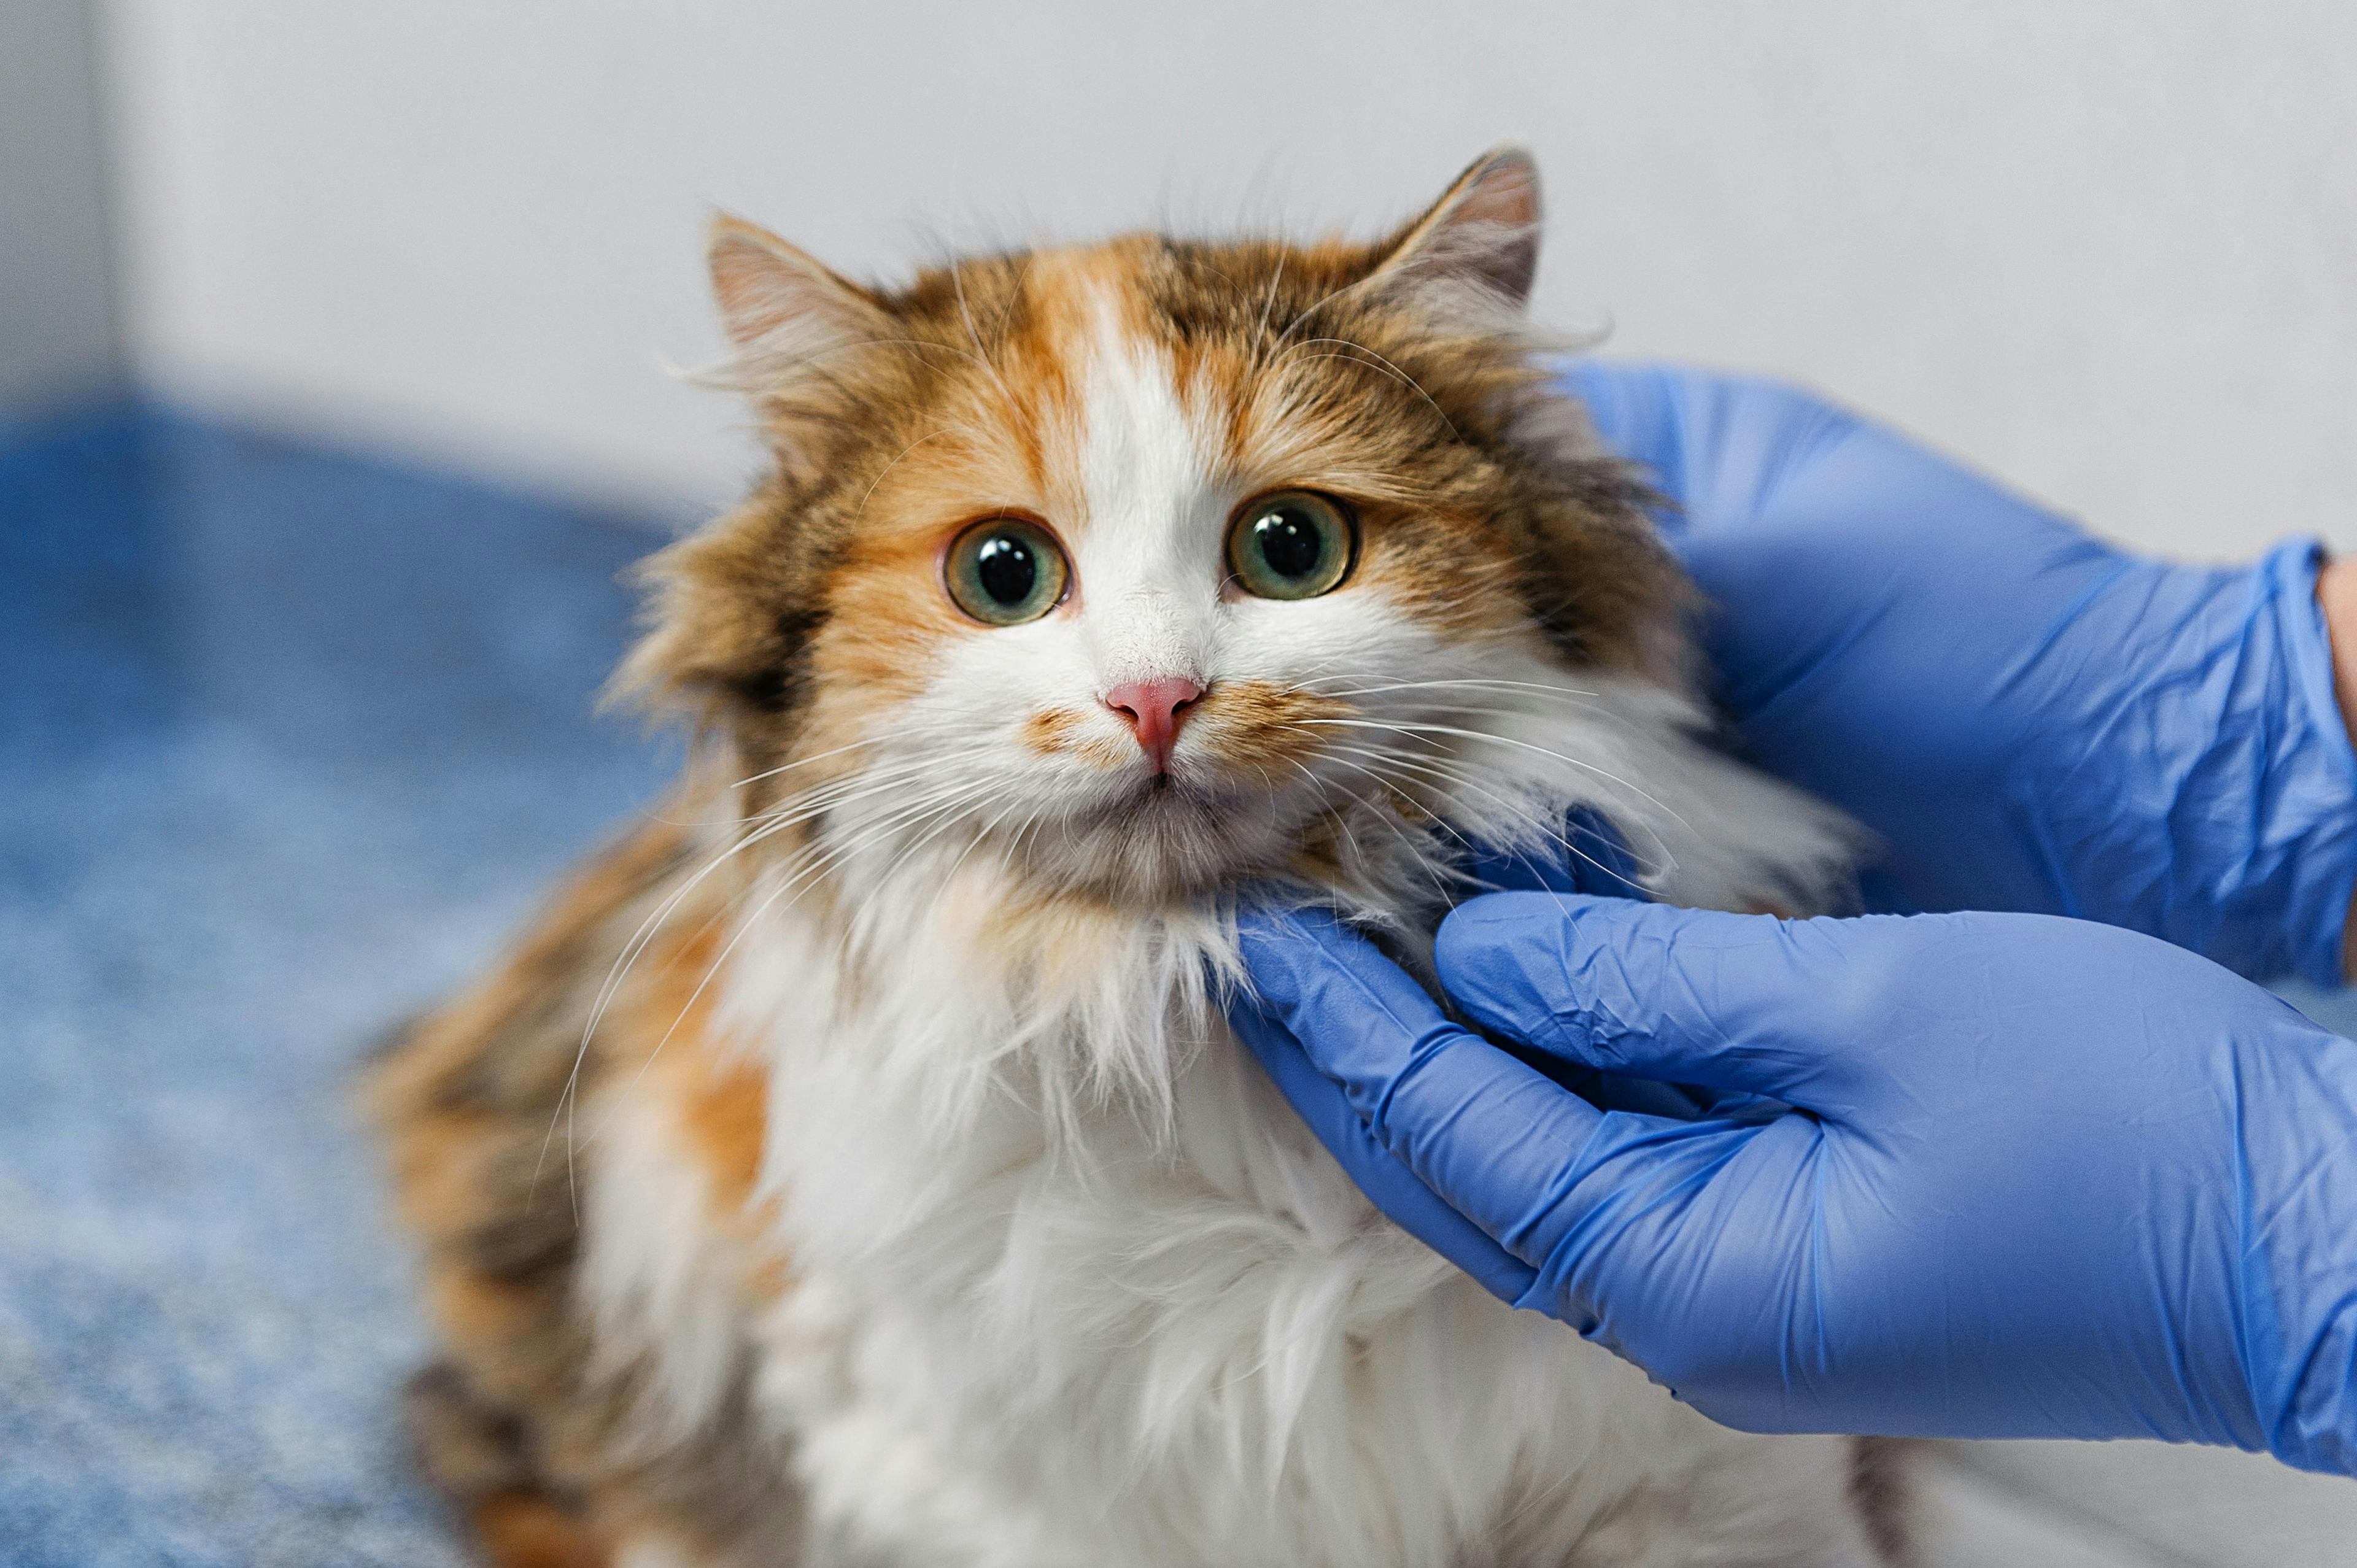 Feline Sterilization at 5 months accepted as new normal 